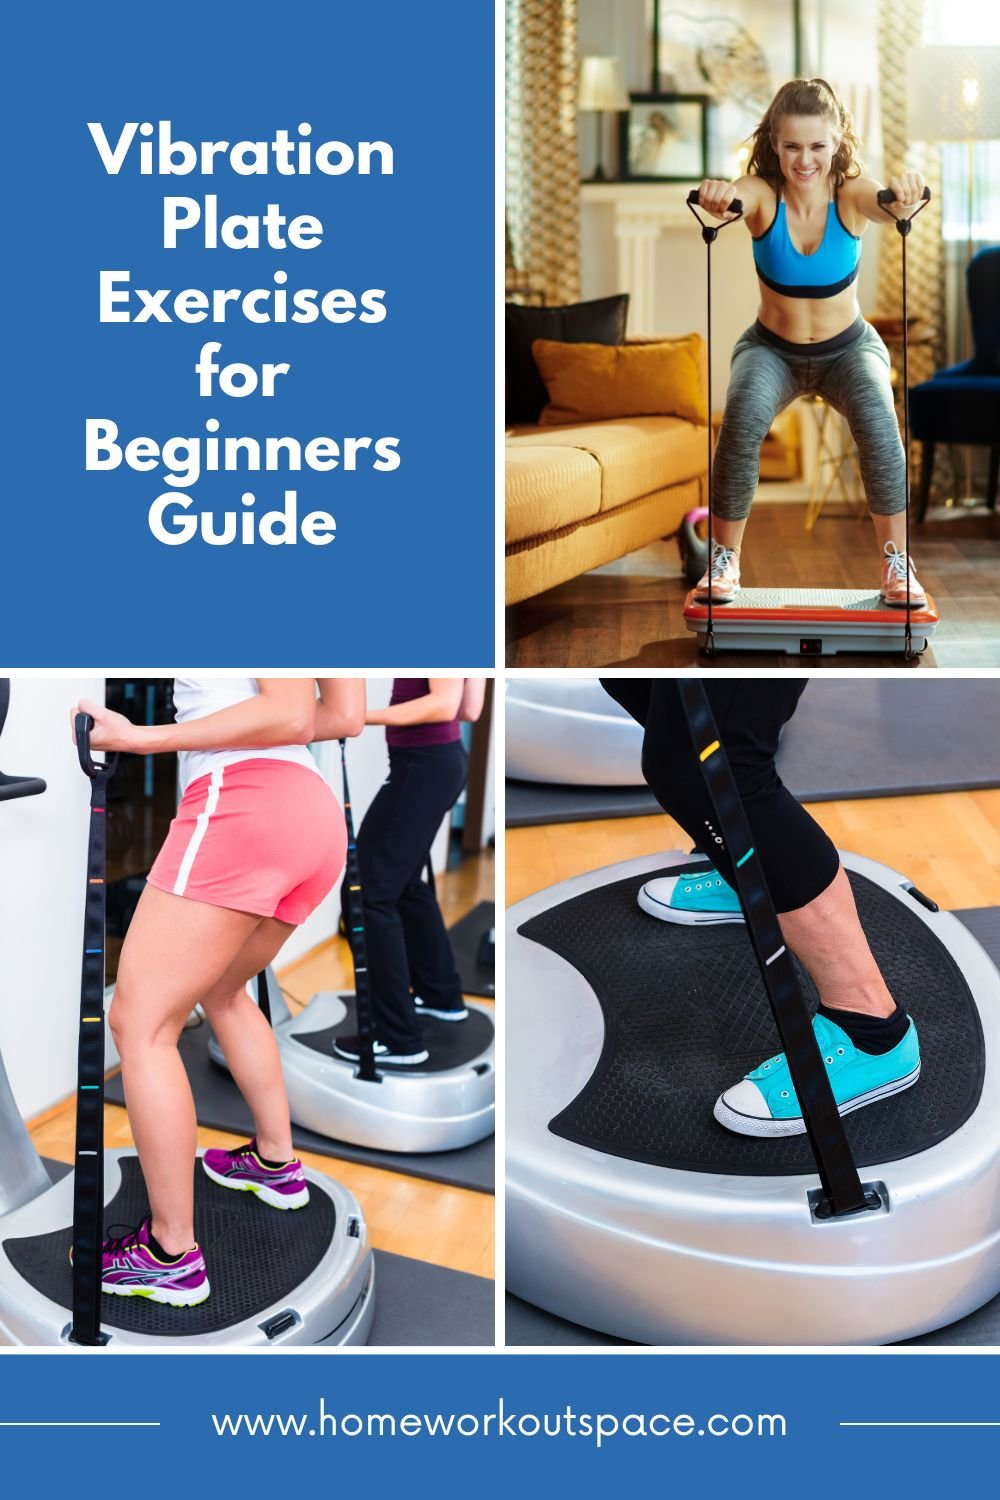 Vibration Plate Exercises for Beginners Guide